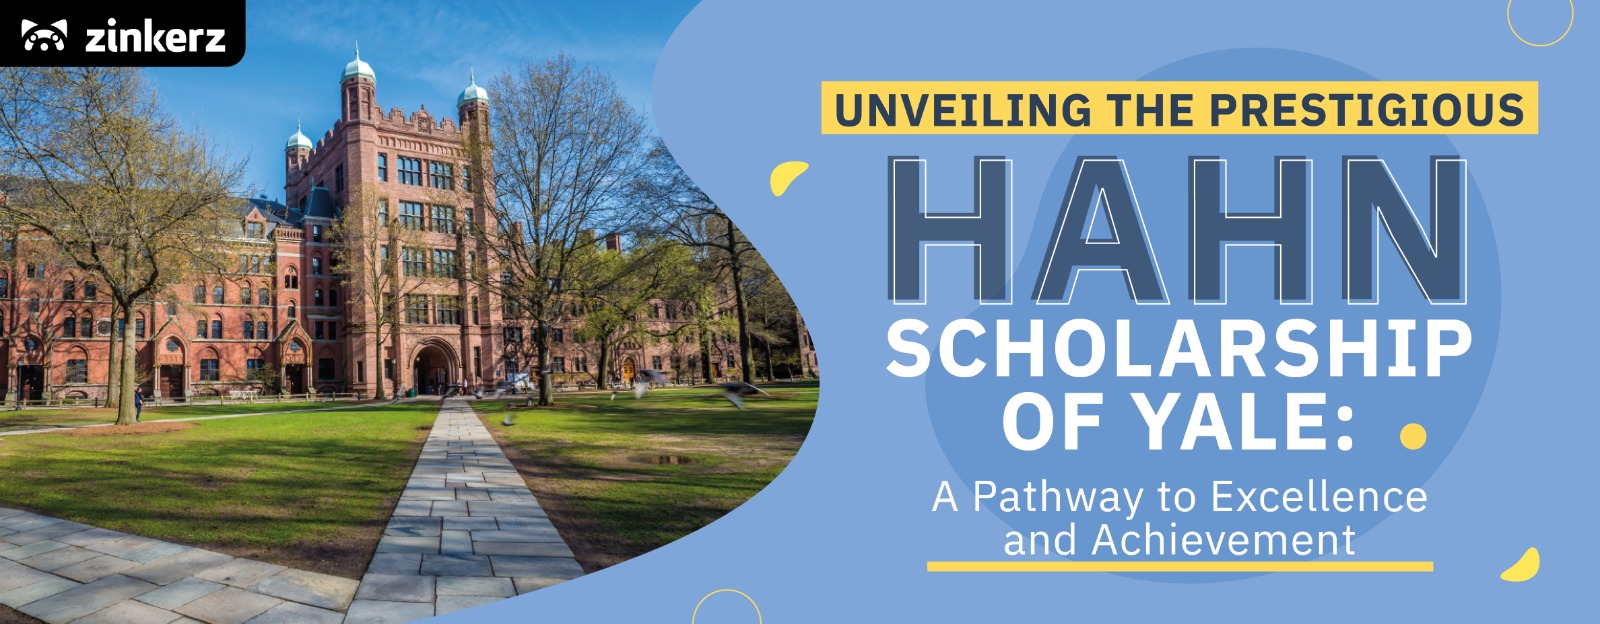 Unveiling the Prestigious Hahn Scholarship of Yale: A Pathway to Excellence and Achievement